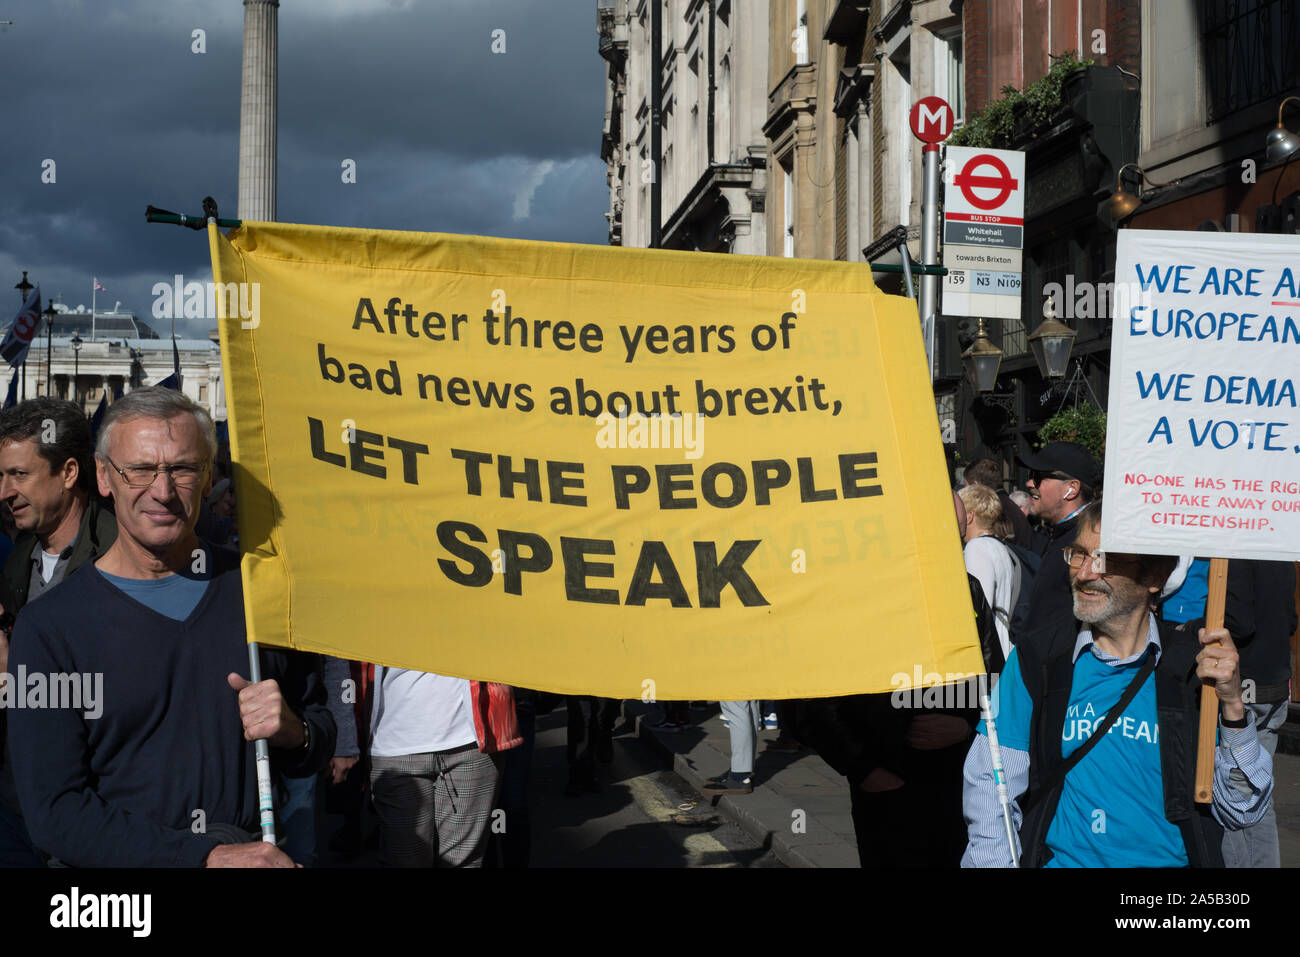 London, England, UK. 19th October 2019. Protestors are marching through central London today to demand that the public are given a final say on Brexit. The march was organised by the 'People's Vote campaign', who are campaining for a final referendum on any Brexit deal to be put to a public vote. The crowd will hear speeches from politicians and celebrities outside the Houses of Parliament. Andrew Steven Graham/Alamy Live News Stock Photo